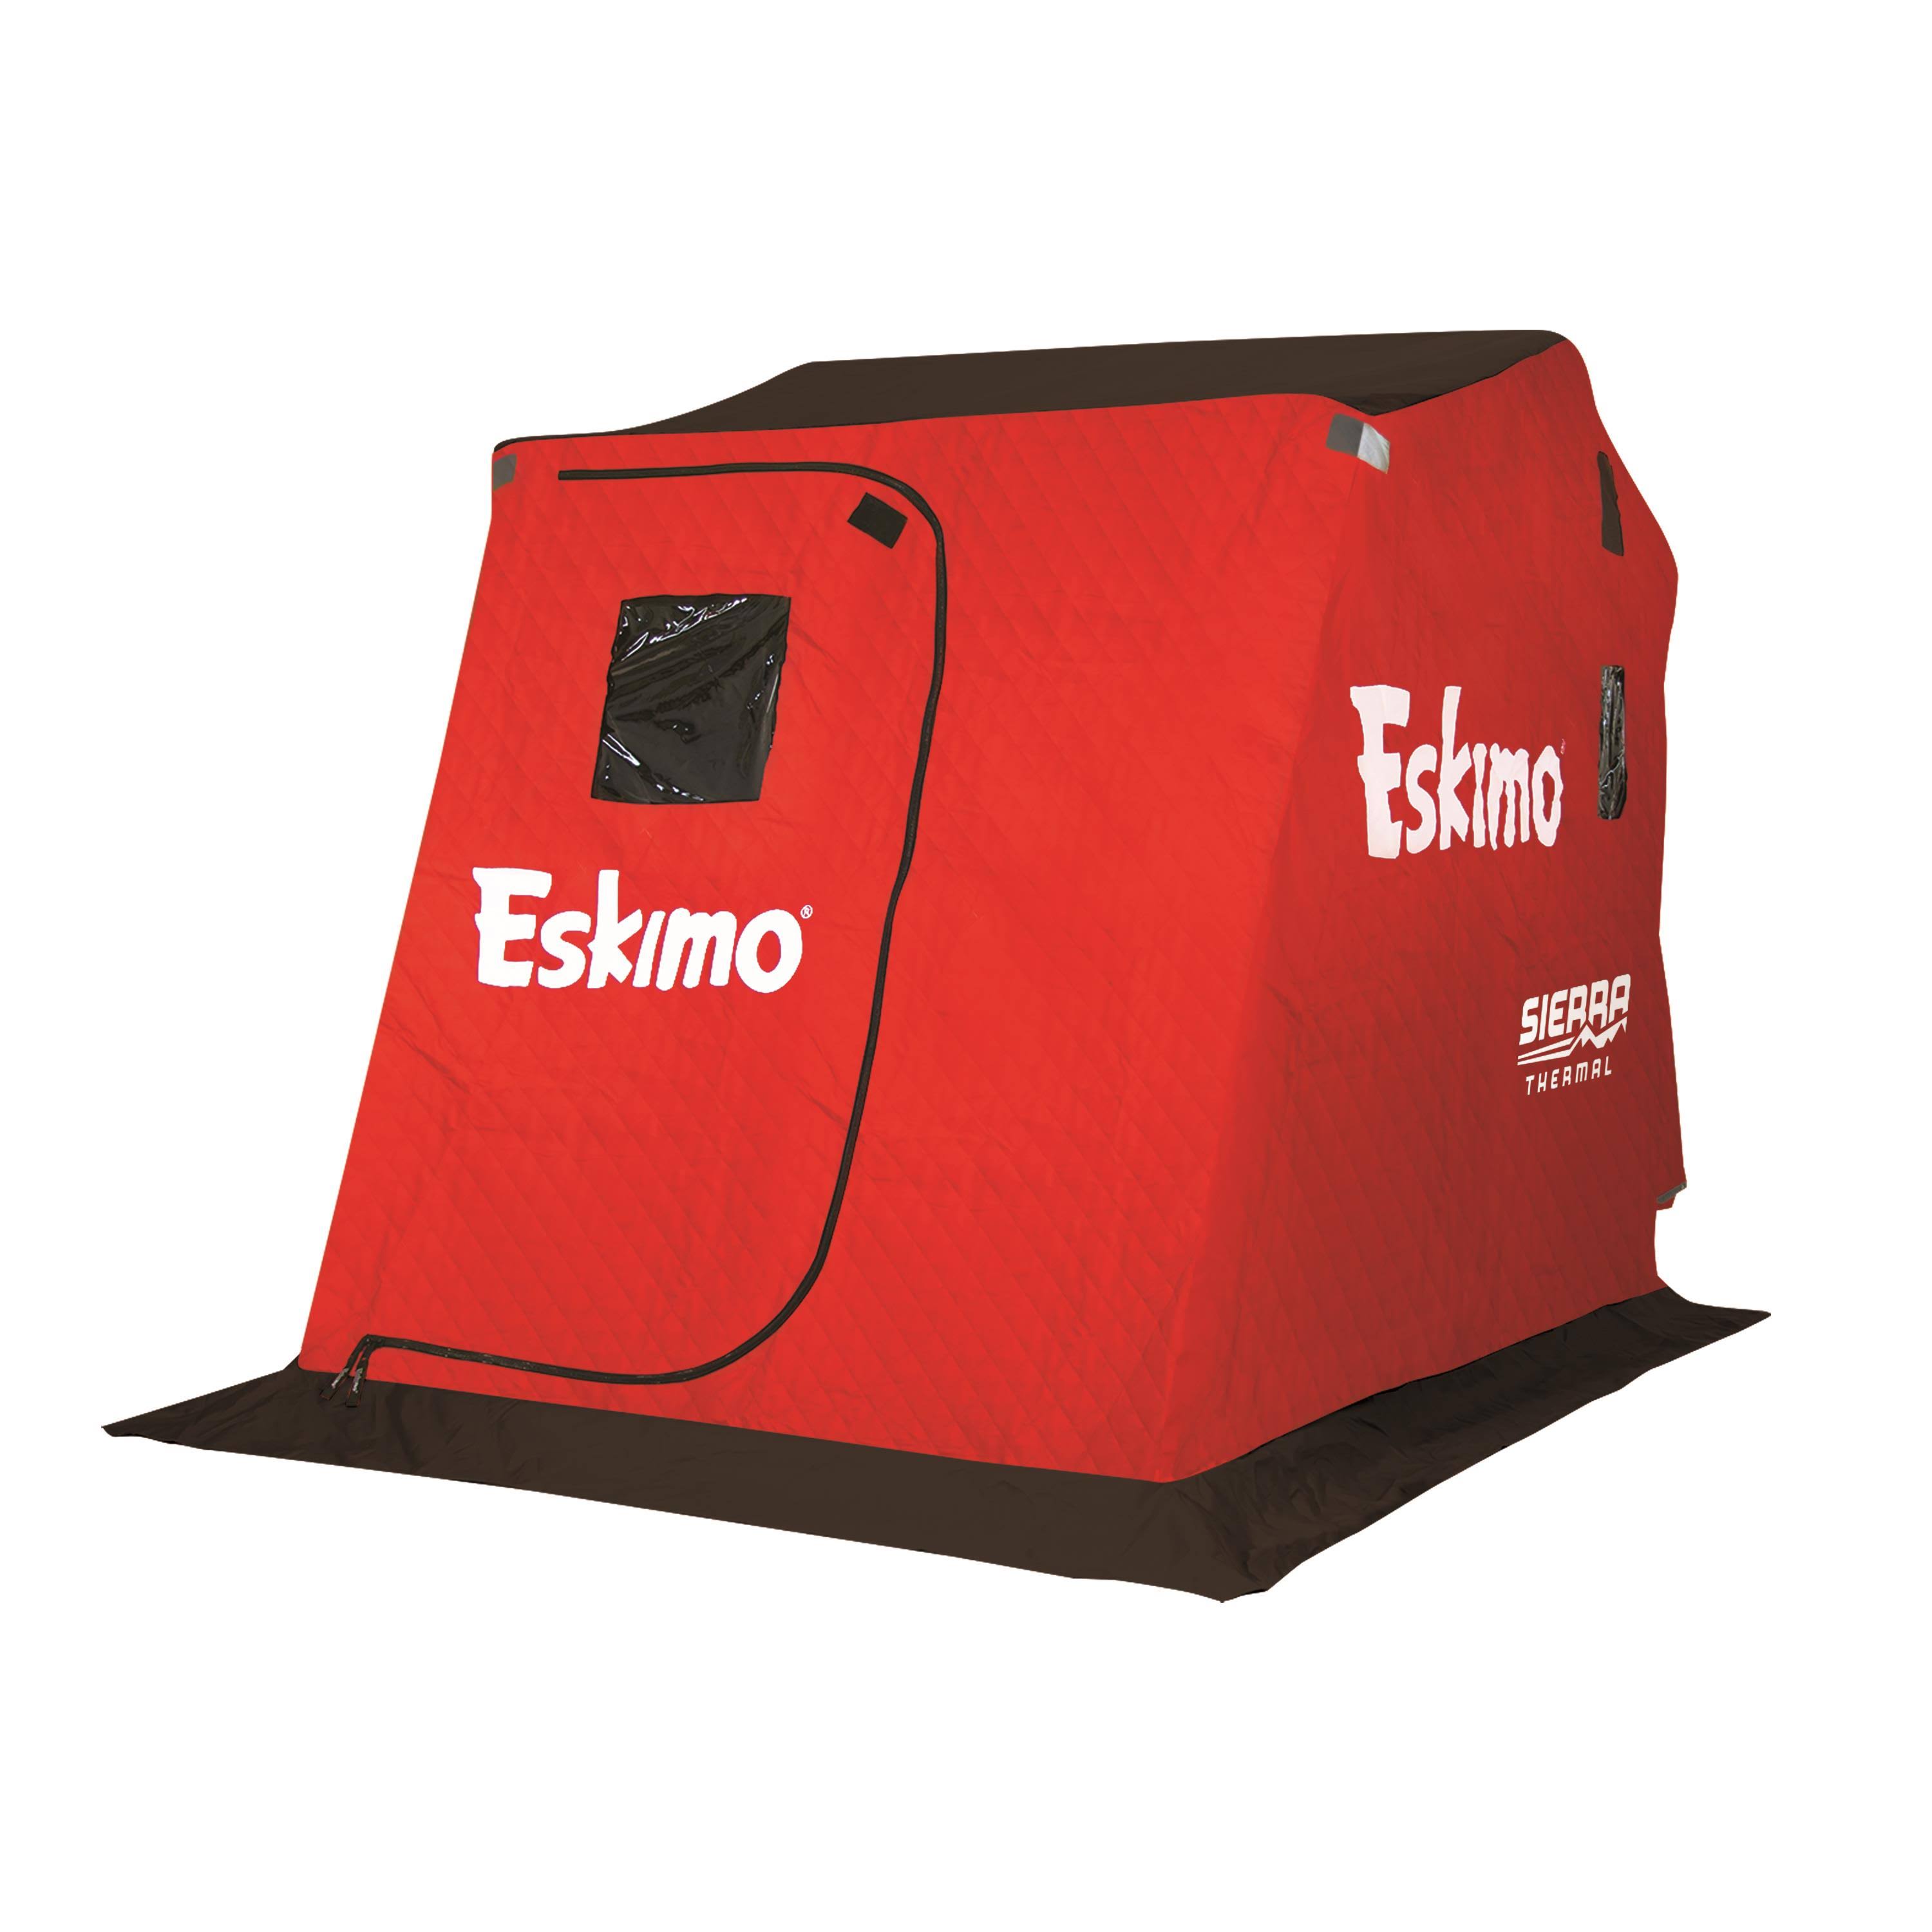 Eskimo Sierra Thermal Flip Style Ice Shelter - with 60" Sled and Swivel Seats, 2 Person